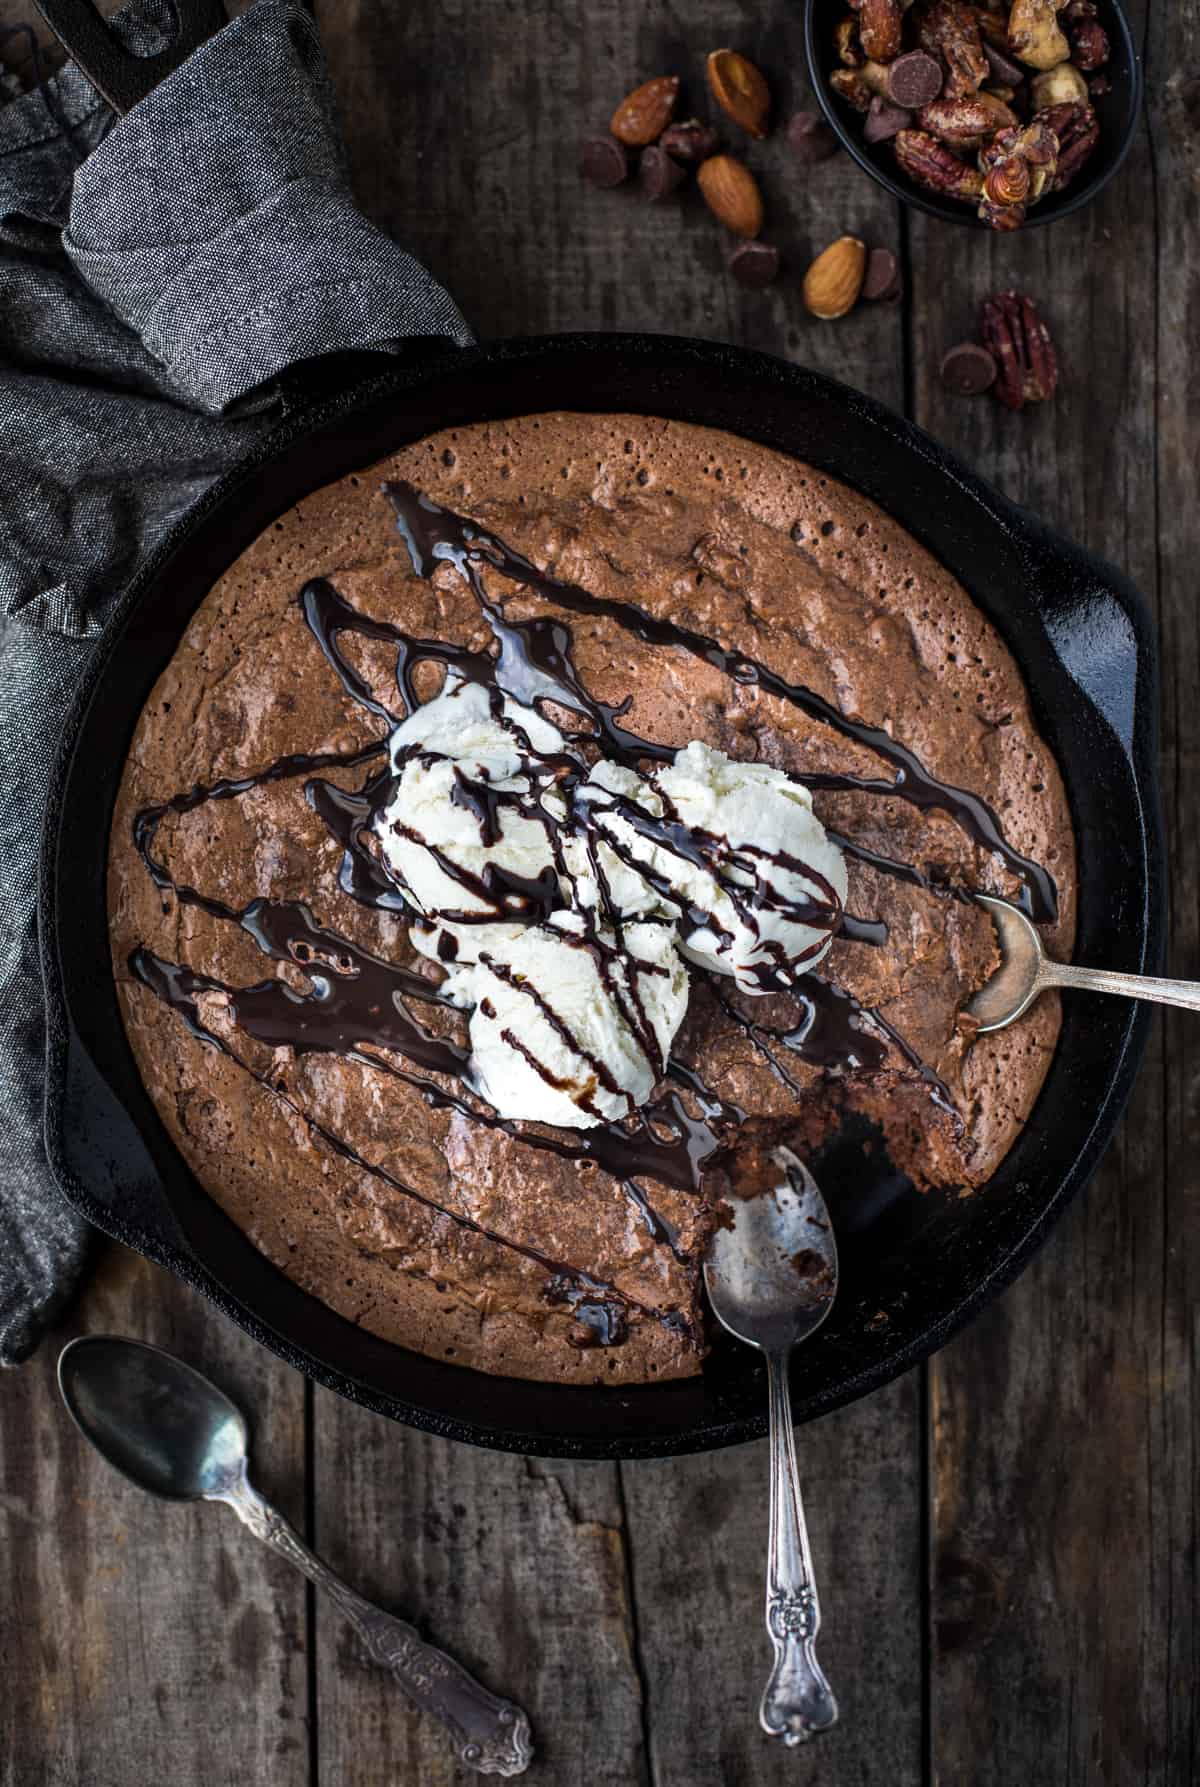 A platter full of Skillet Brownies topped with ice cream and chocolate sauce.
